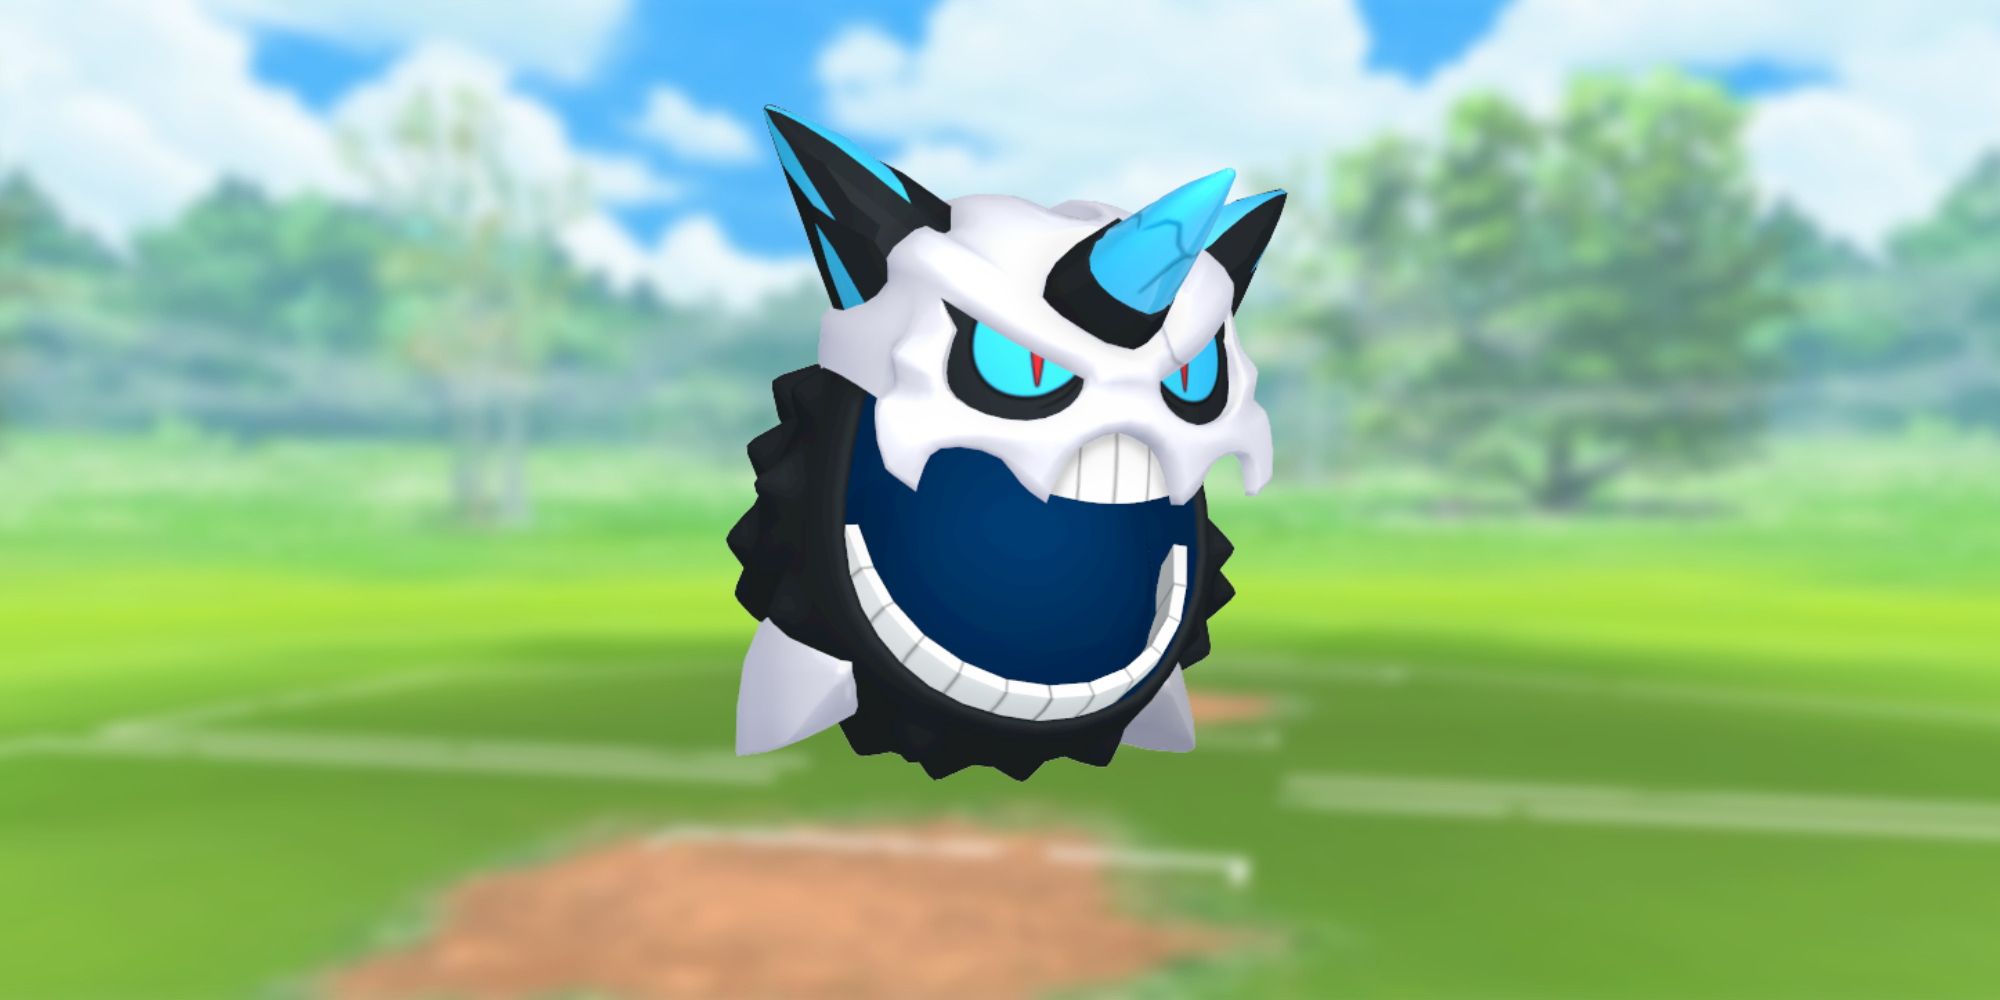 Mega Glalie from Pokemon with the Pokemon Go battlefield as the background